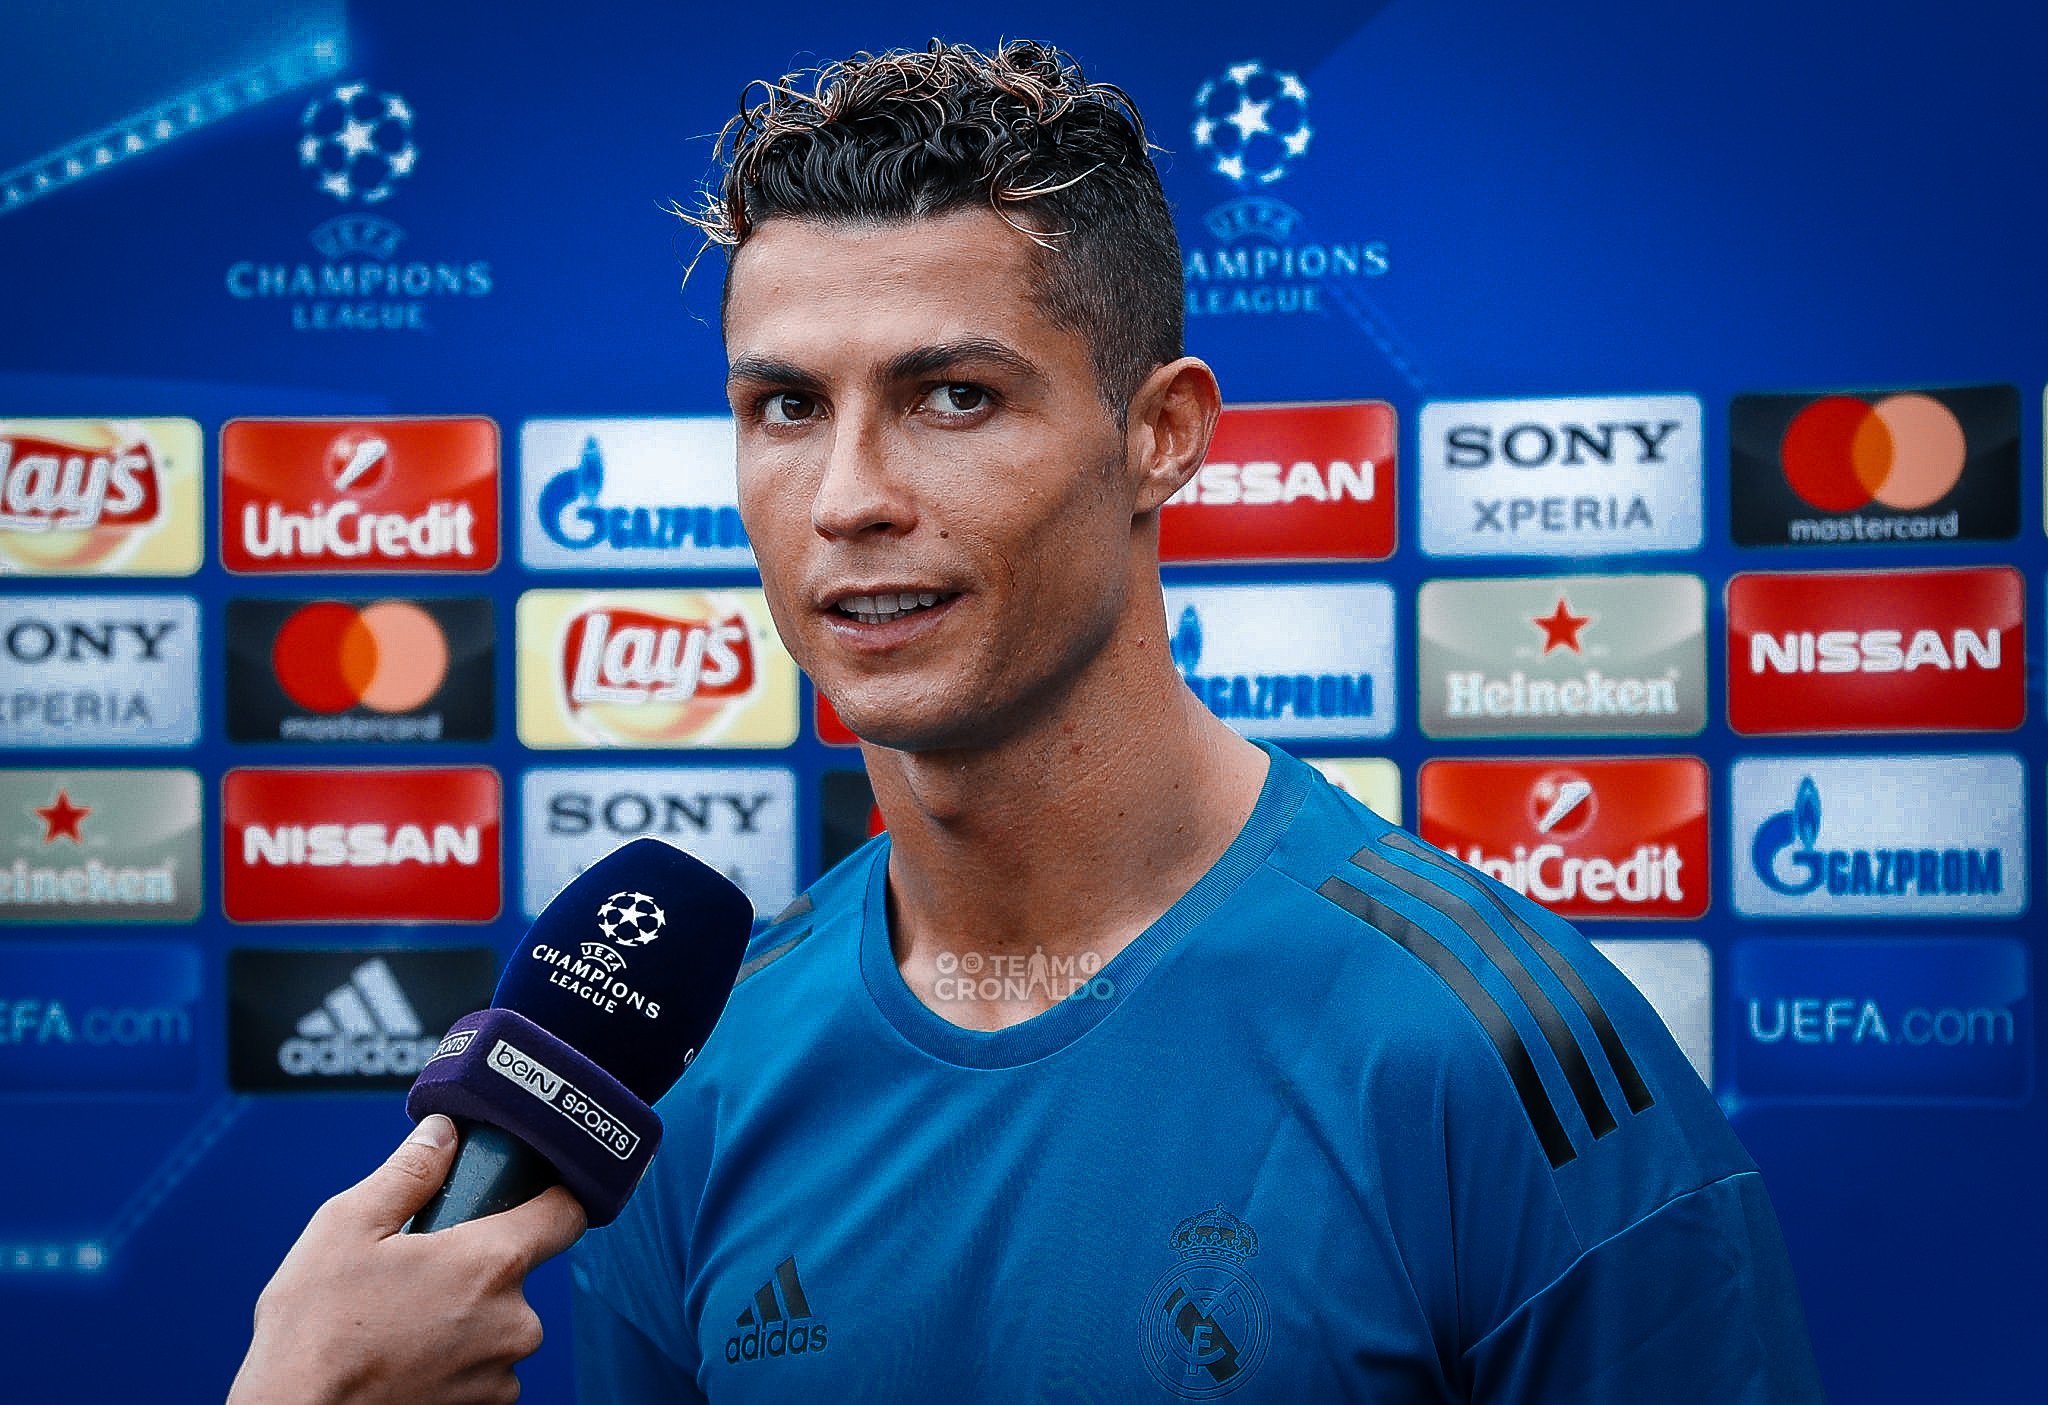 TCR. on X: "1 week until Cristiano Ronaldo gives an interview and we know  the truth. ⏳ https://t.co/Ymm81OFDvZ" / X